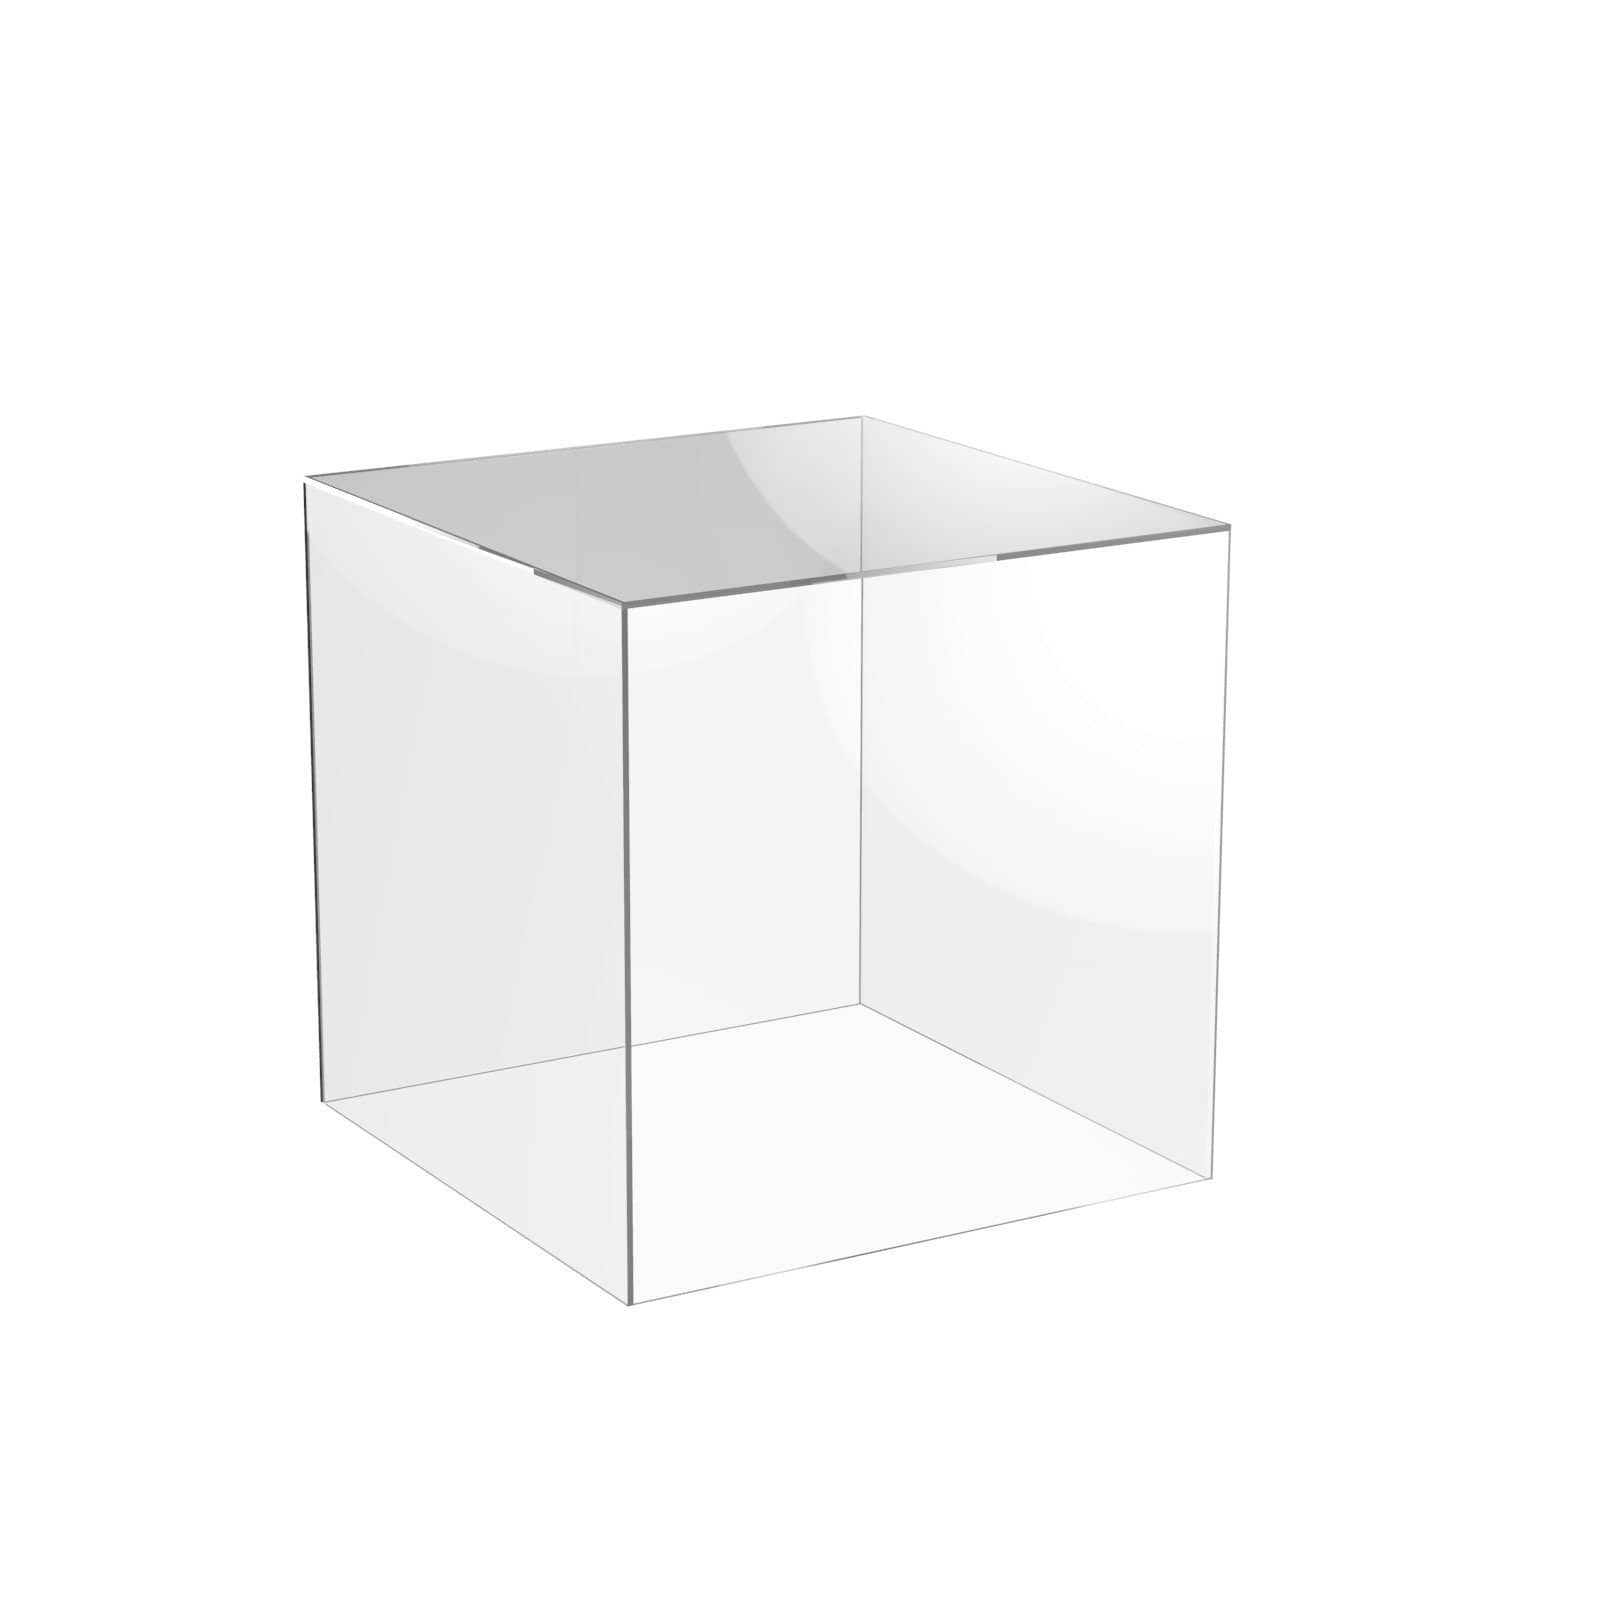 Clear Acrylic 5 Sided Display Box or Cover - 12W x 12D x 8H